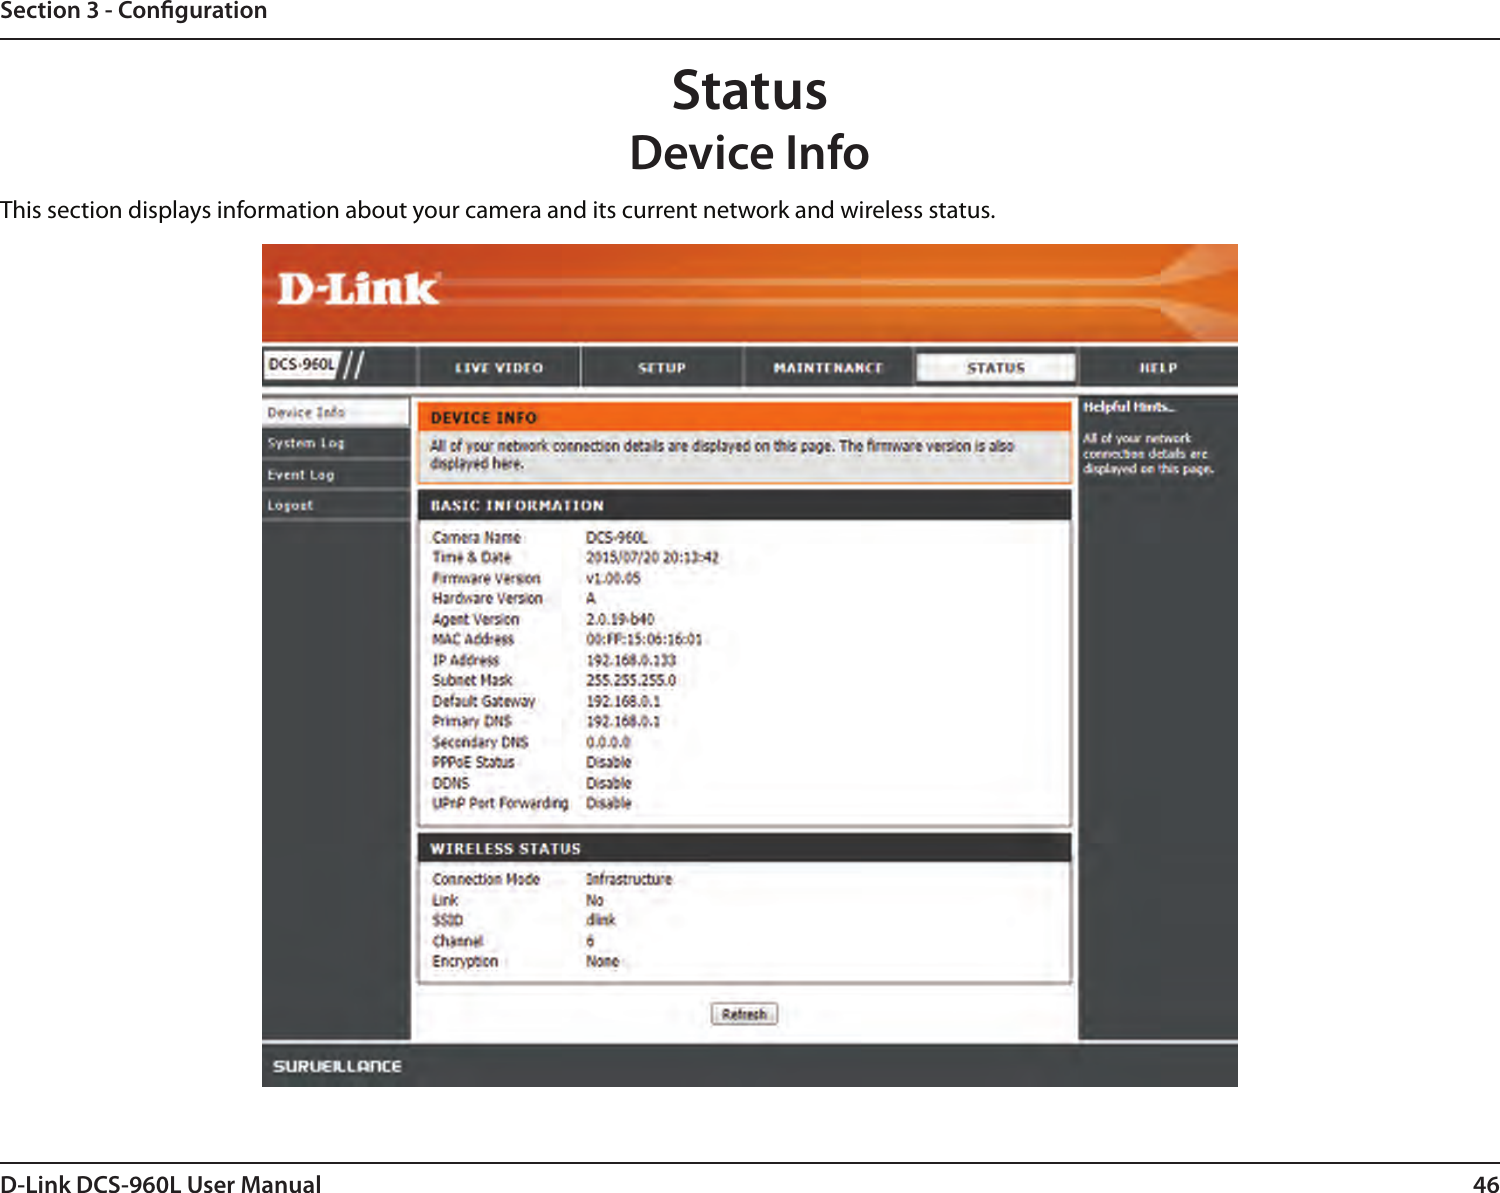 46D-Link DCS-960L User ManualSection 3 - CongurationStatusDevice InfoThis section displays information about your camera and its current network and wireless status.